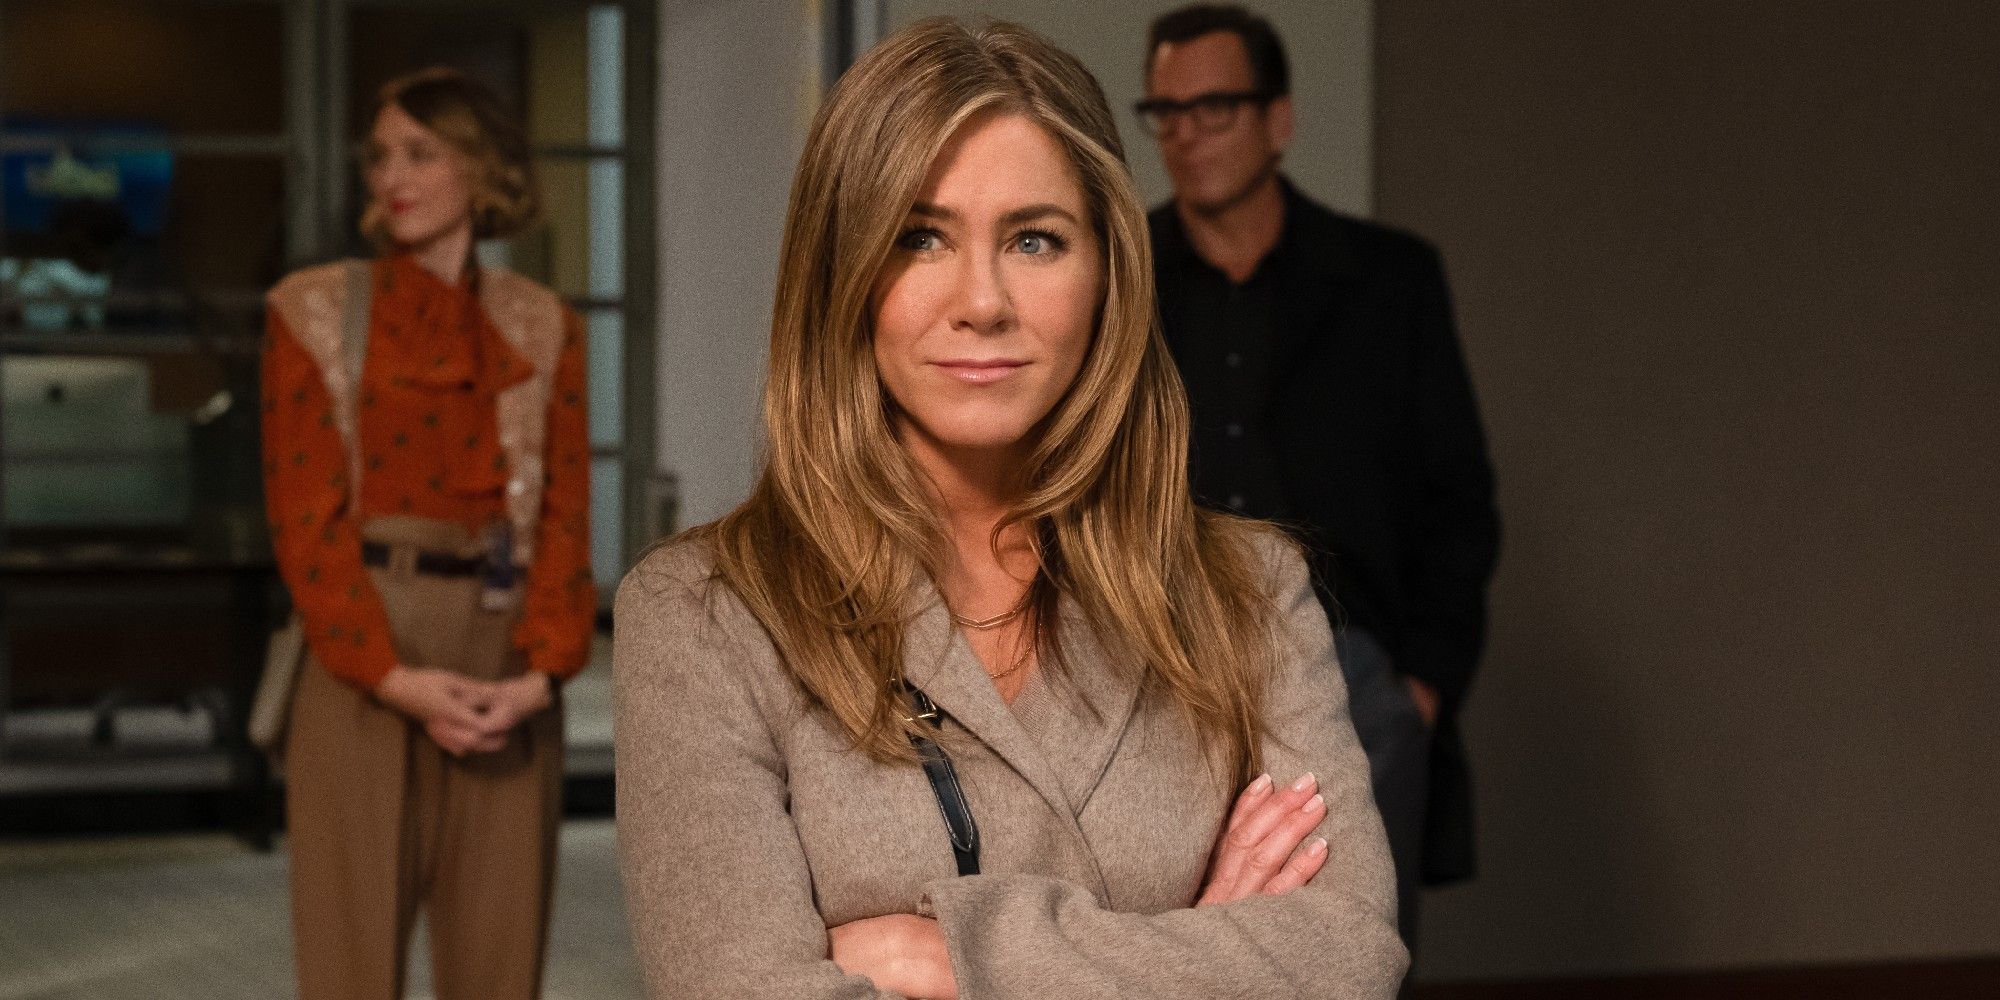 Alex Levy smiling with her arms crossed in the morning show season jennifer aniston as alex levy in the morning show season 2